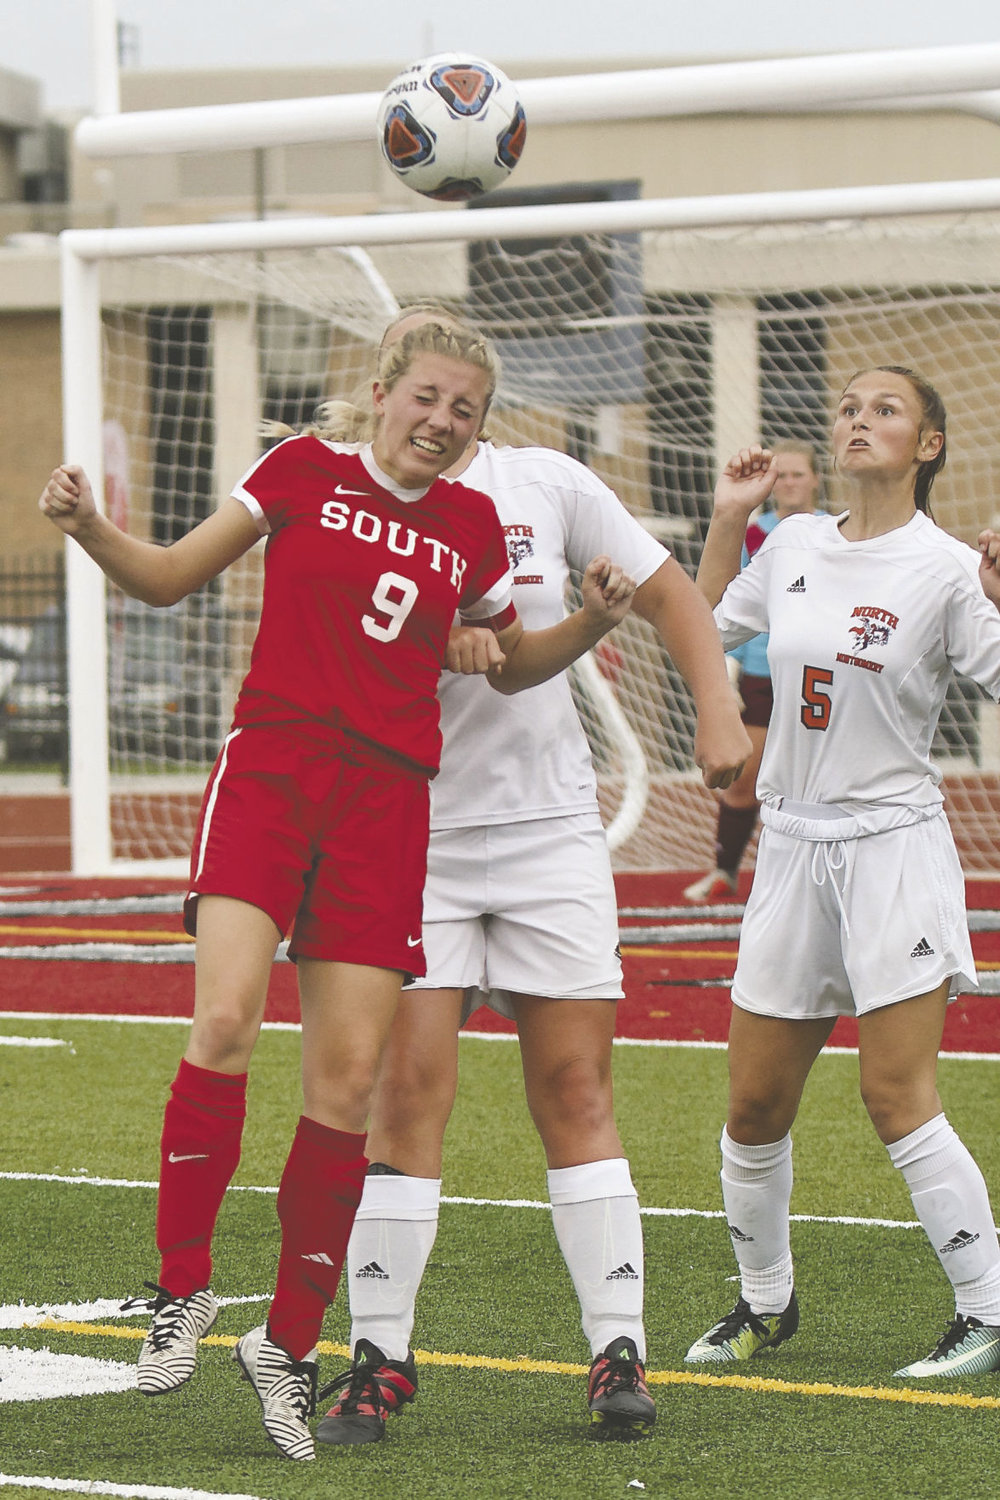 Lexie Odum scored both Southmont goals in a 3-2 shootout win over North Montgomery on Tuesday.